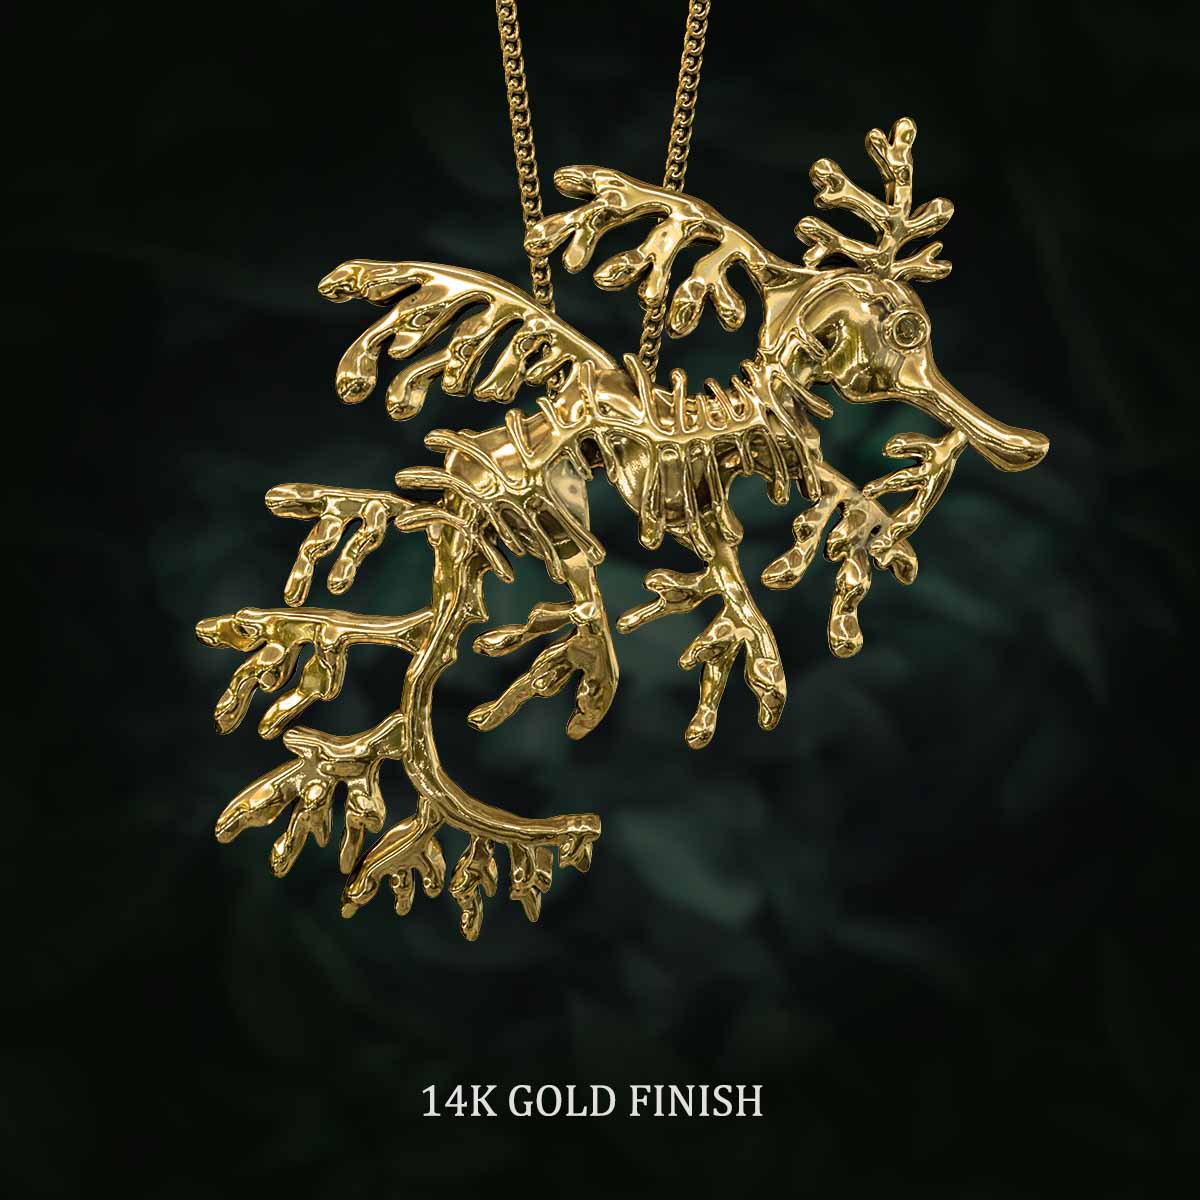 14k-Gold-Finish-Leafy-Sea-Dragon-Pendant-Jewelry-For-Necklace